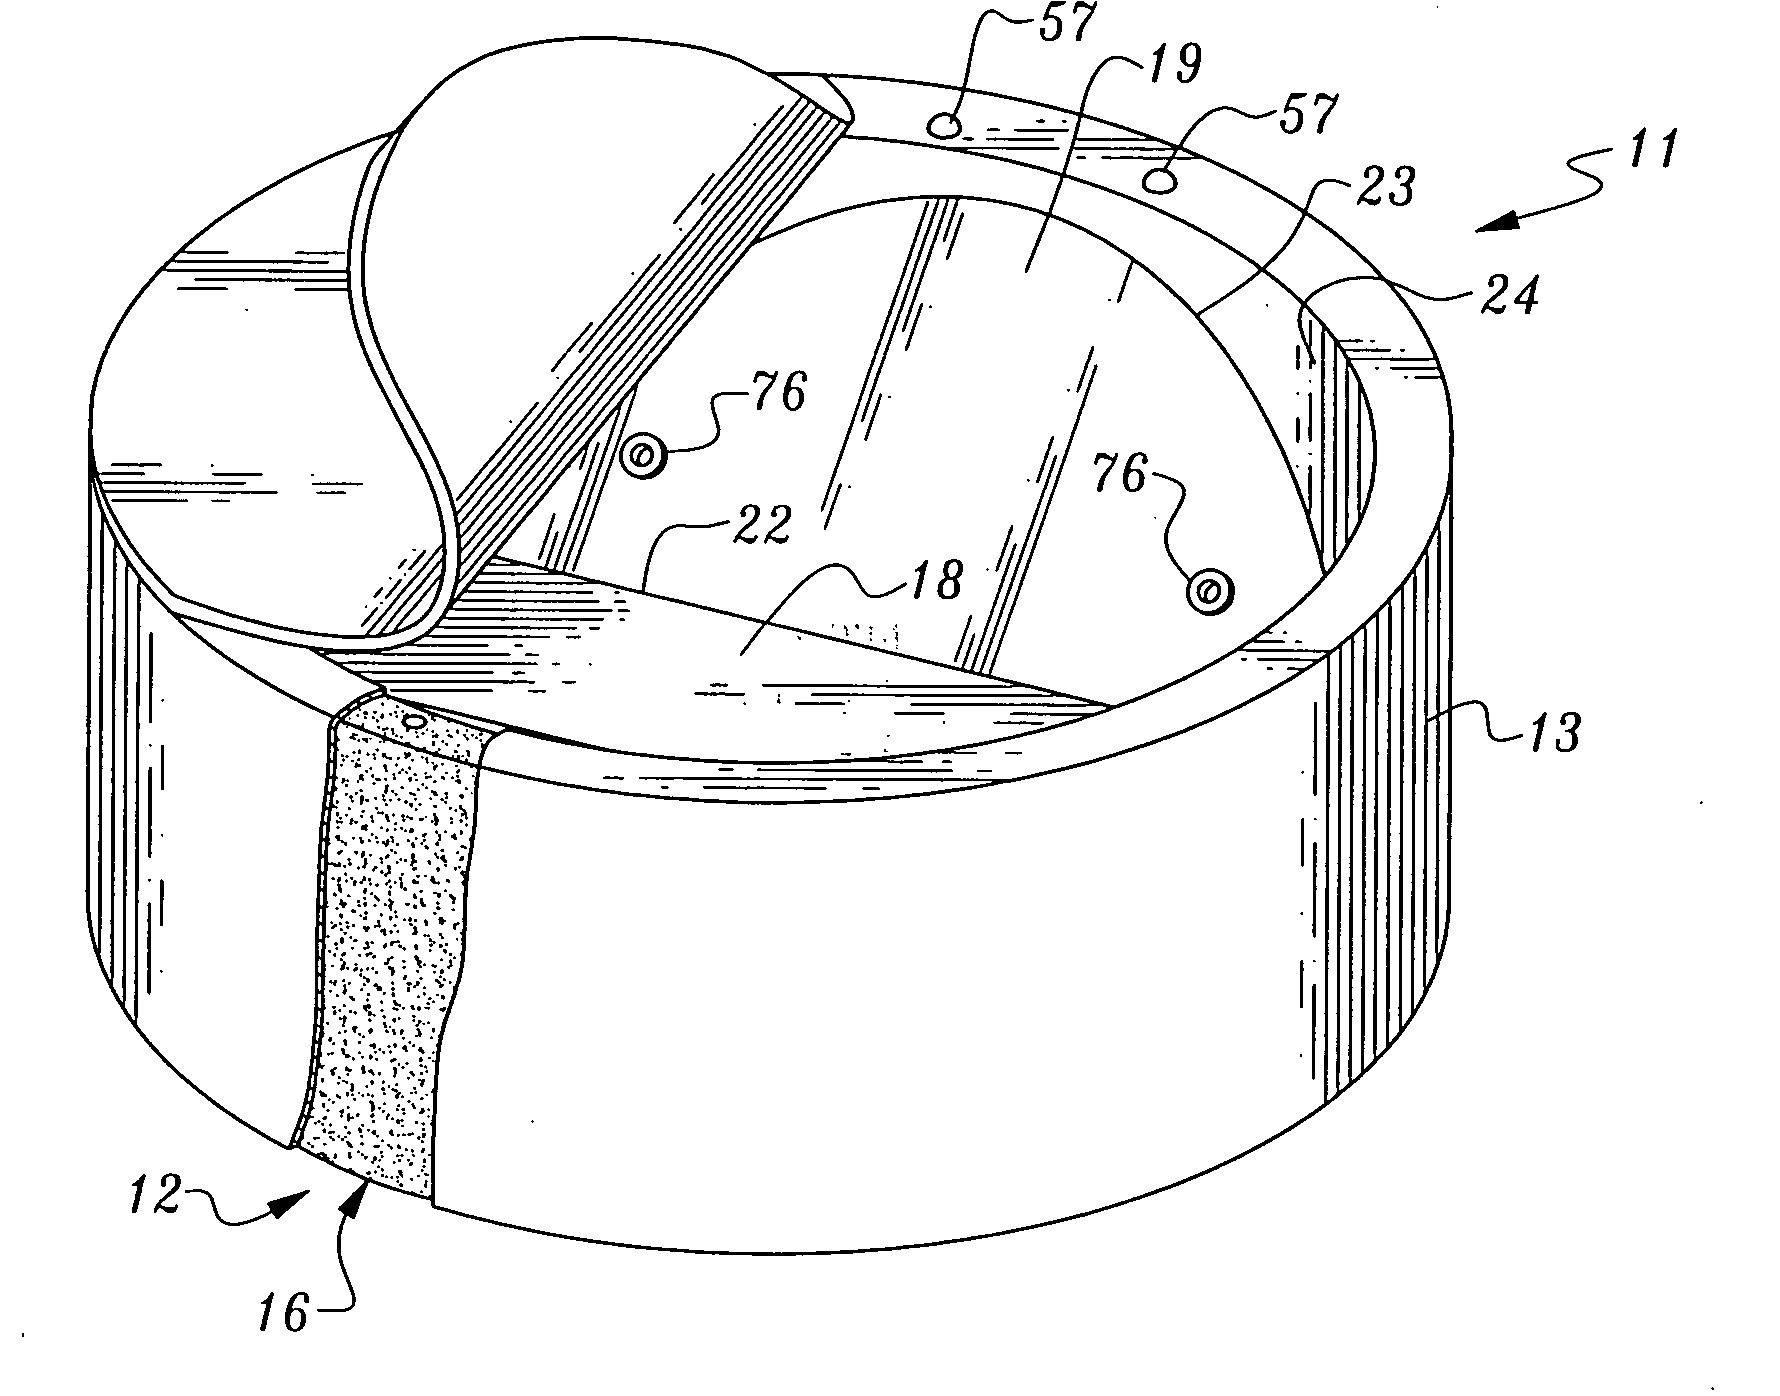 Spa with integrally molded working components and method for making same